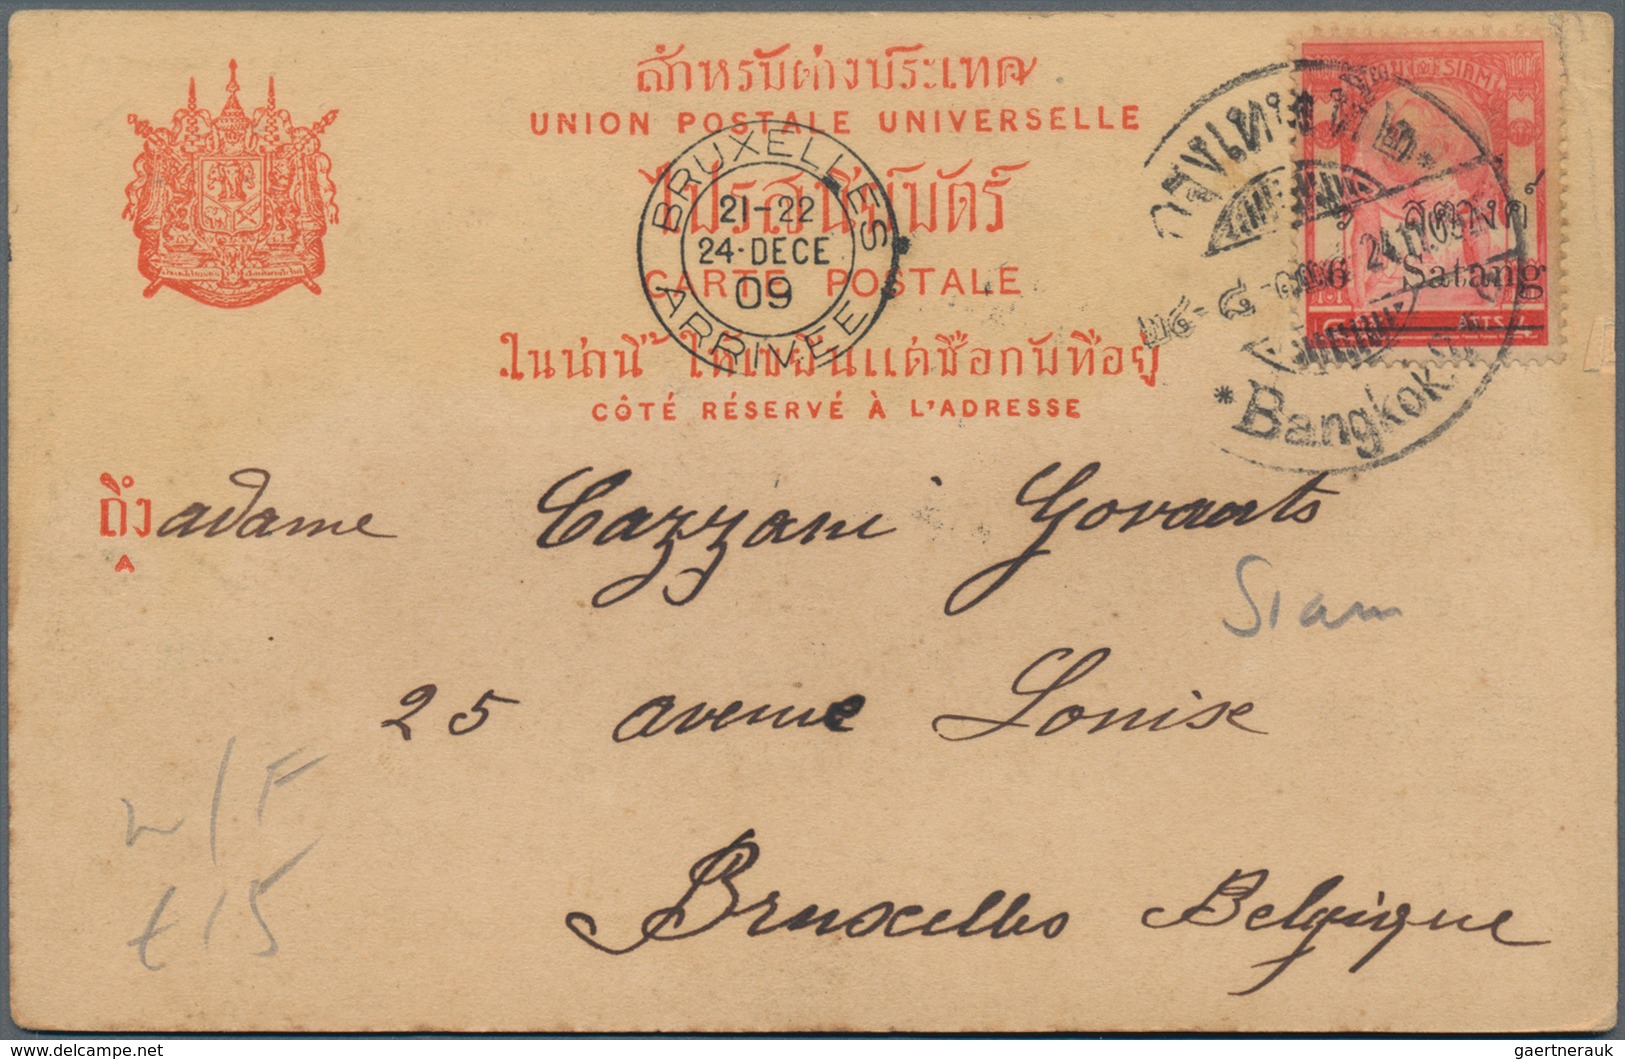 Thailand: 1901/1923, 42 old picture postcards , 25 of them franked with overseas destinations and so